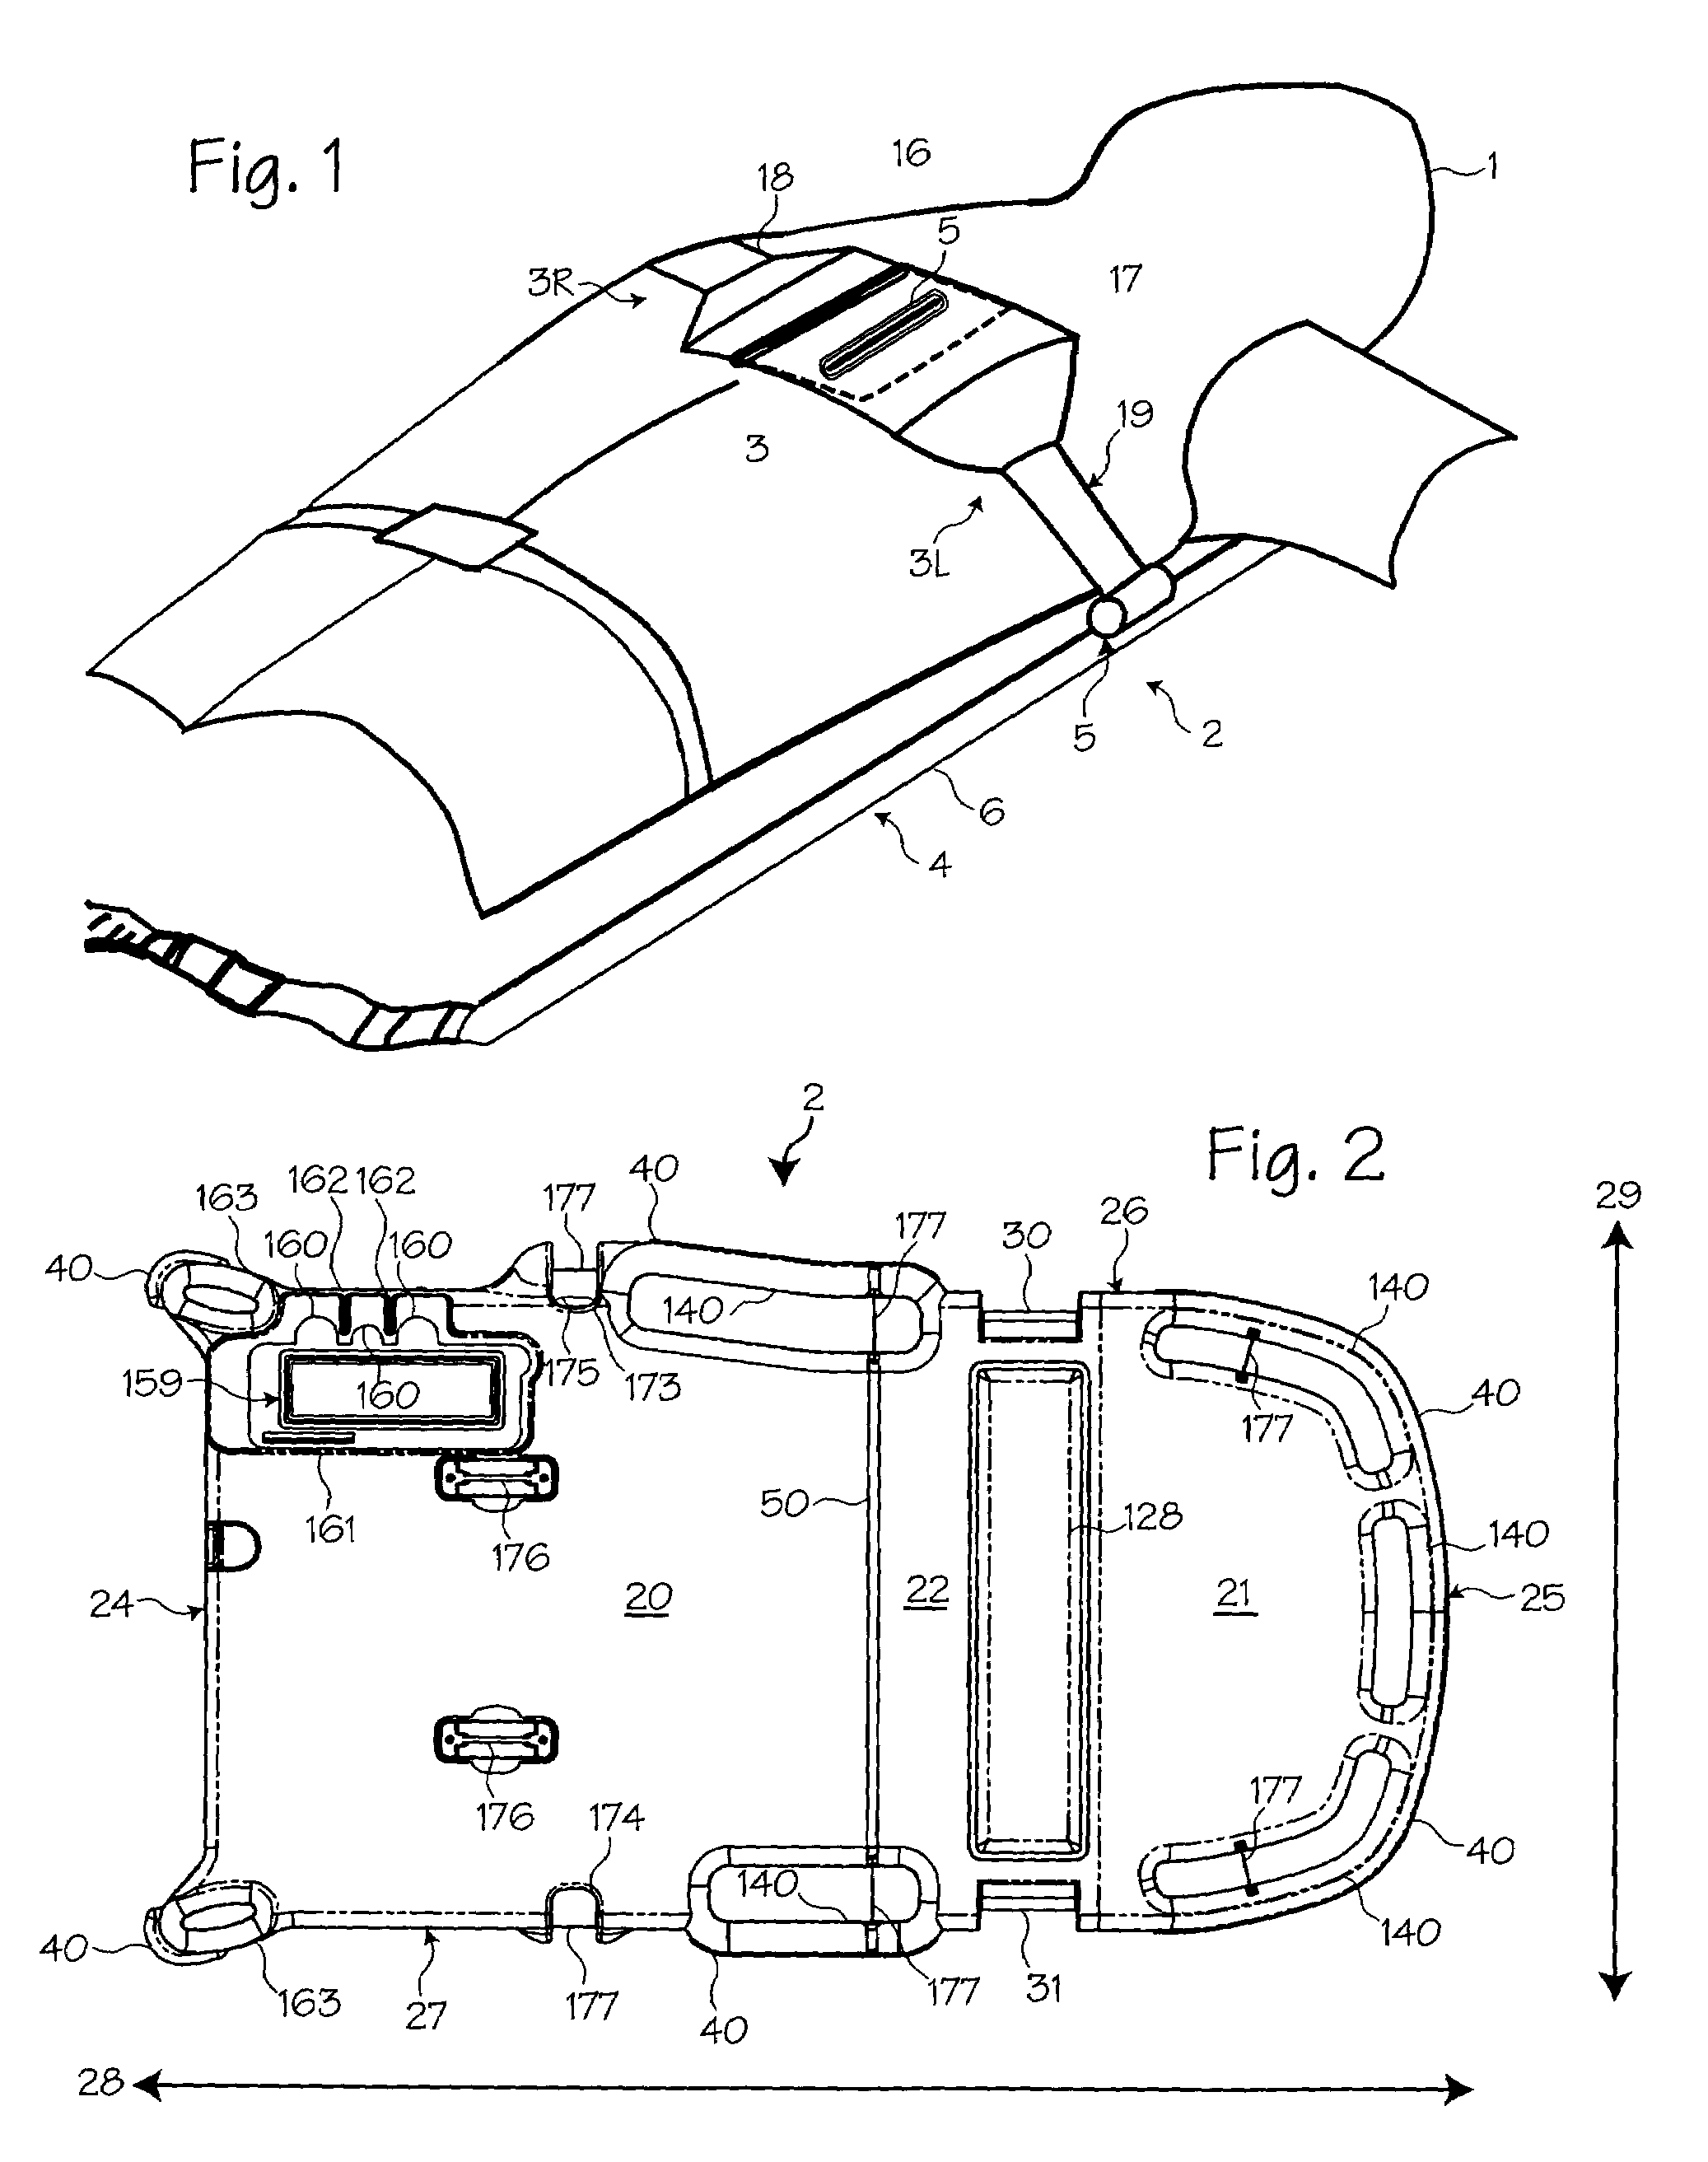 Lightweight electro-mechanical chest compression device